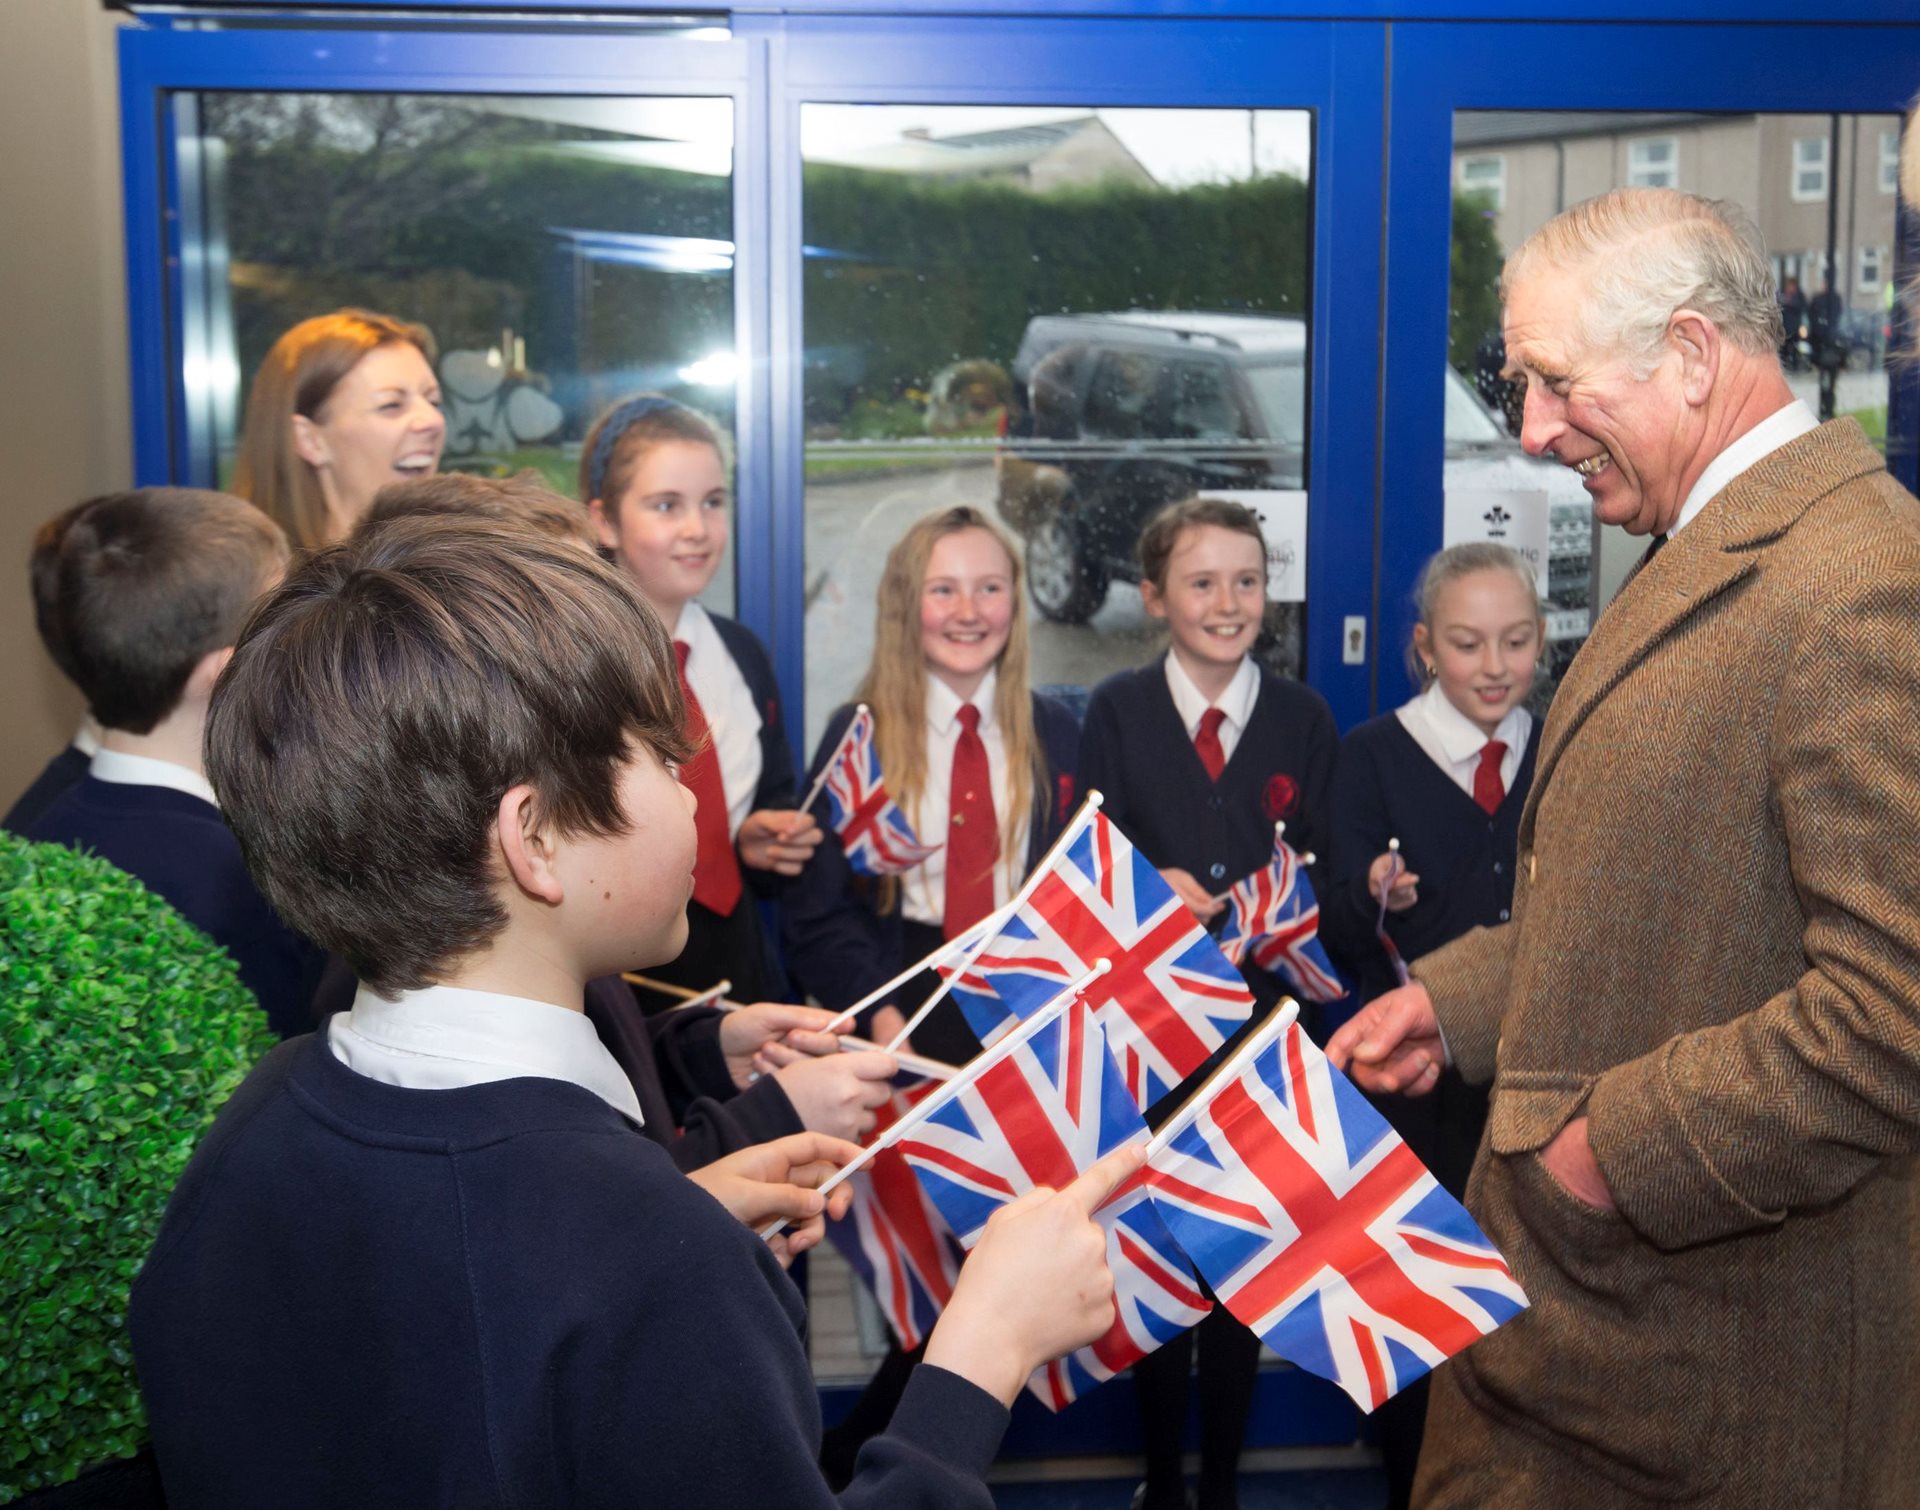 2017 H.R.H. the former Prince of Wales visit the Hospice